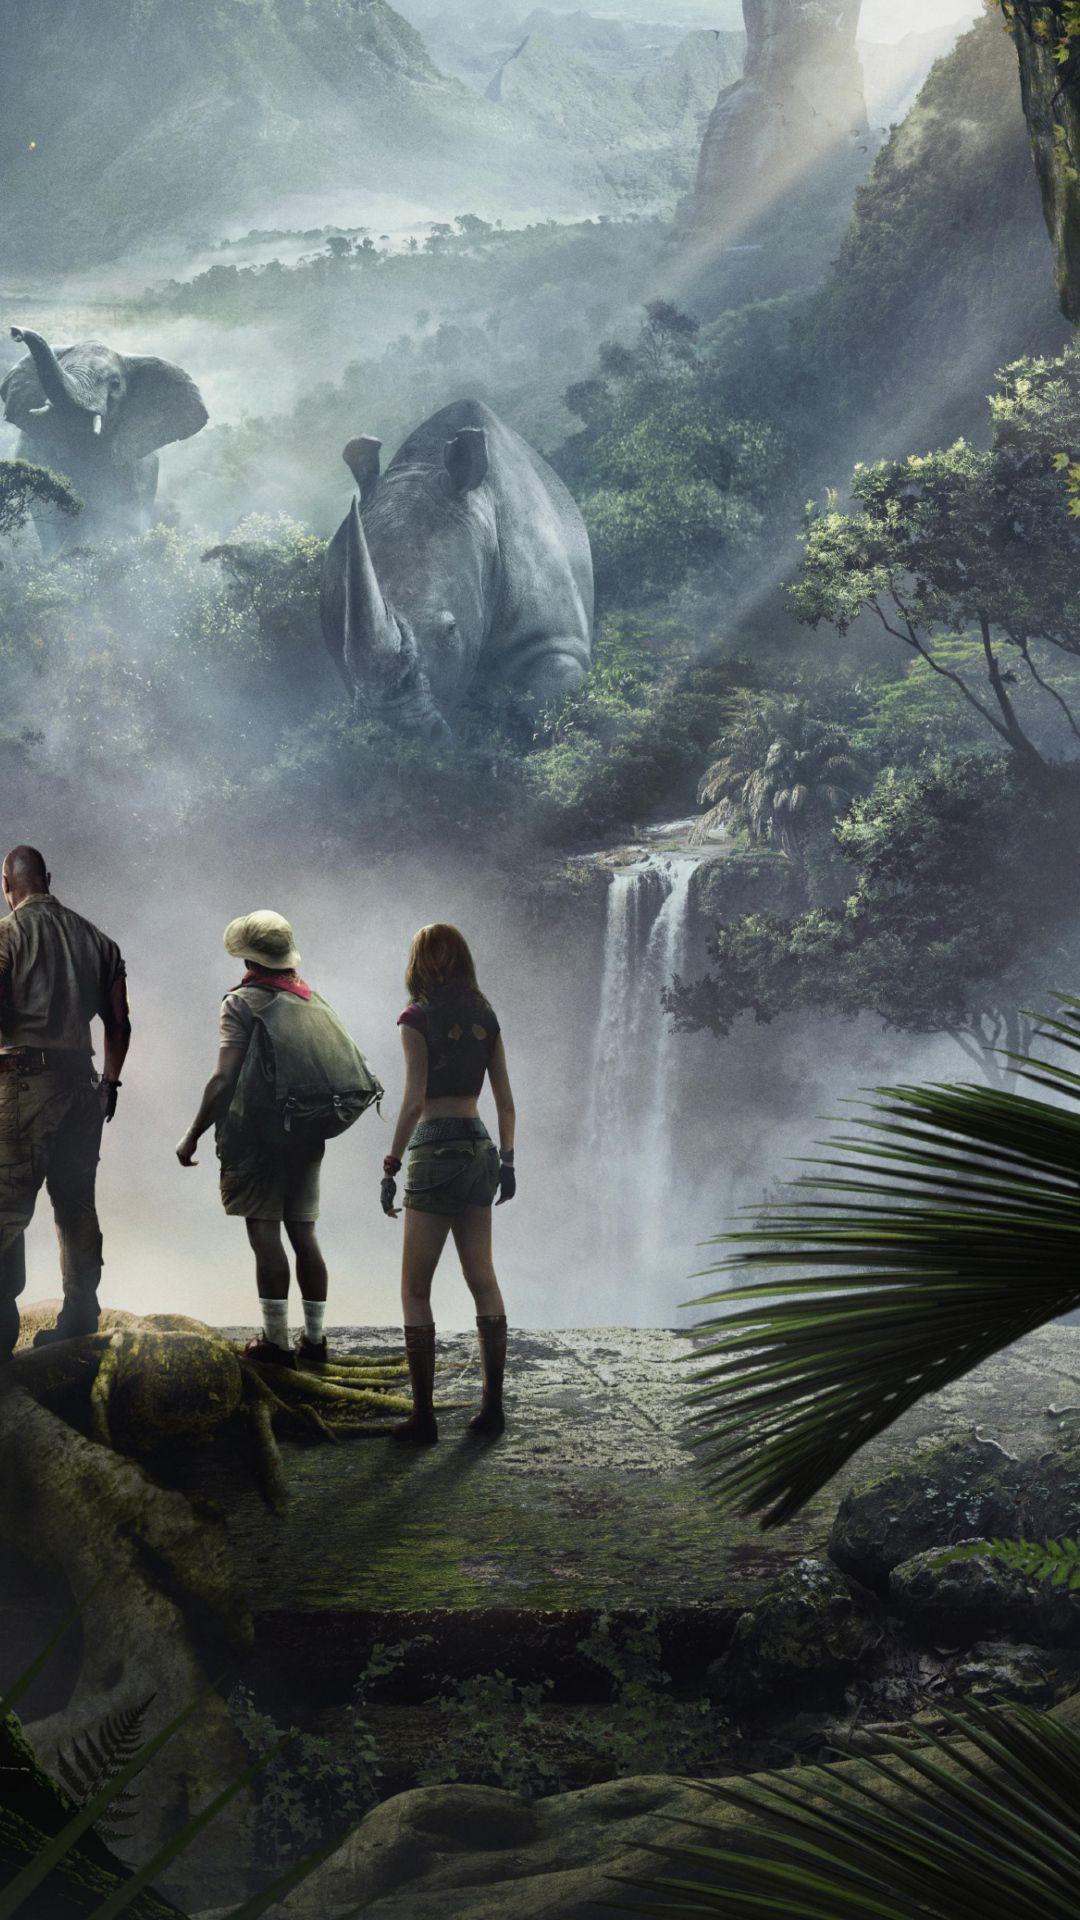 free for mac download Jumanji: Welcome to the Jungle